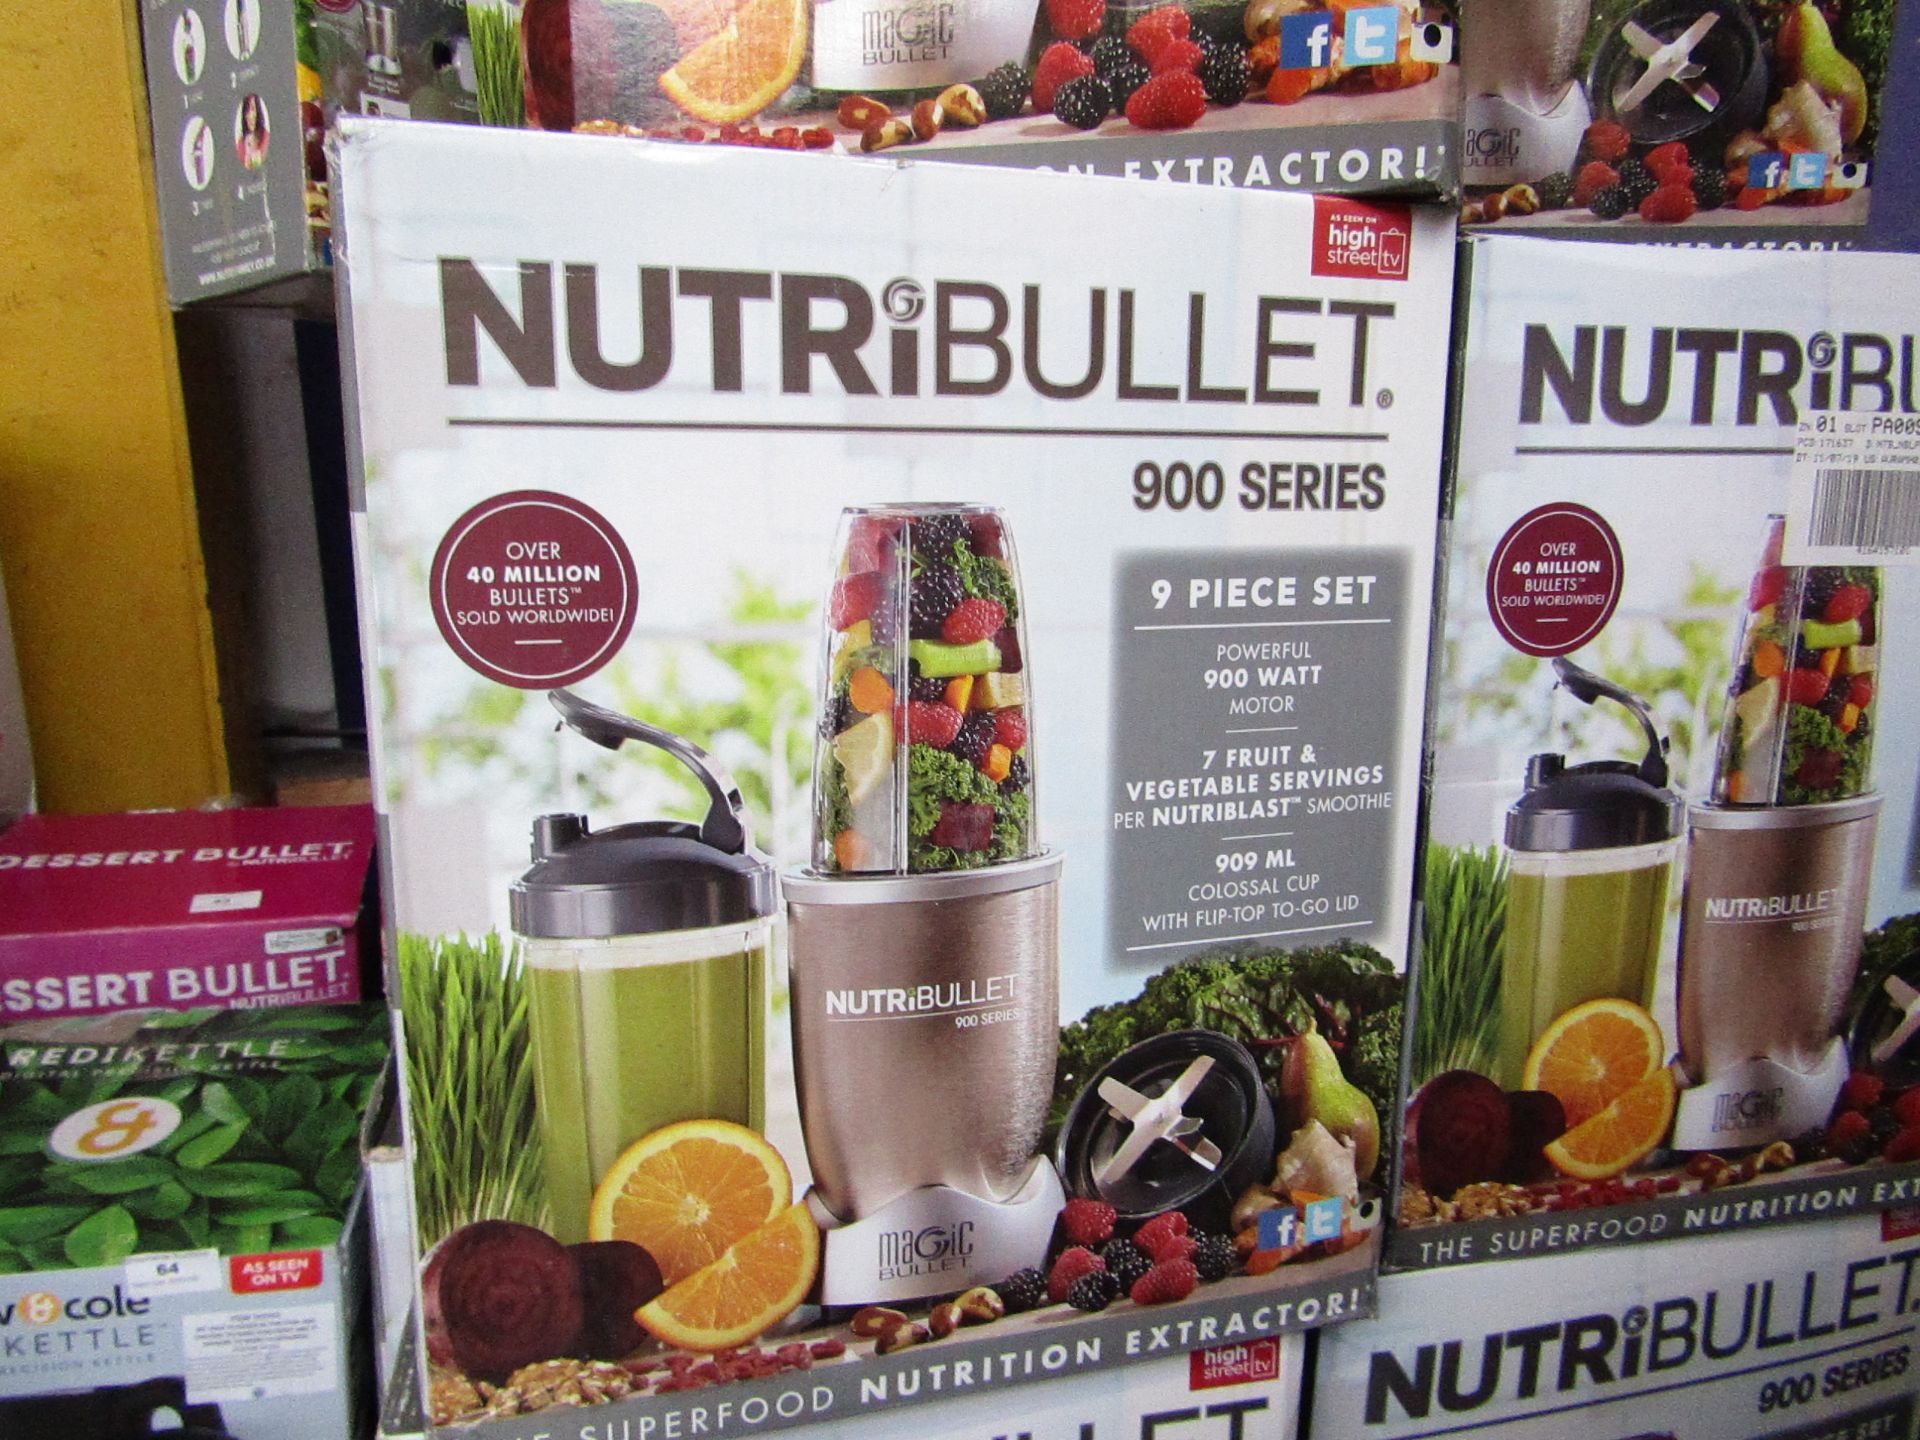 | 1X | NUTRIBULLET 900 SERIES | UNCHECKED AND BOXED | NO ONLINE RE-SALE | SKU C5060191467353 |